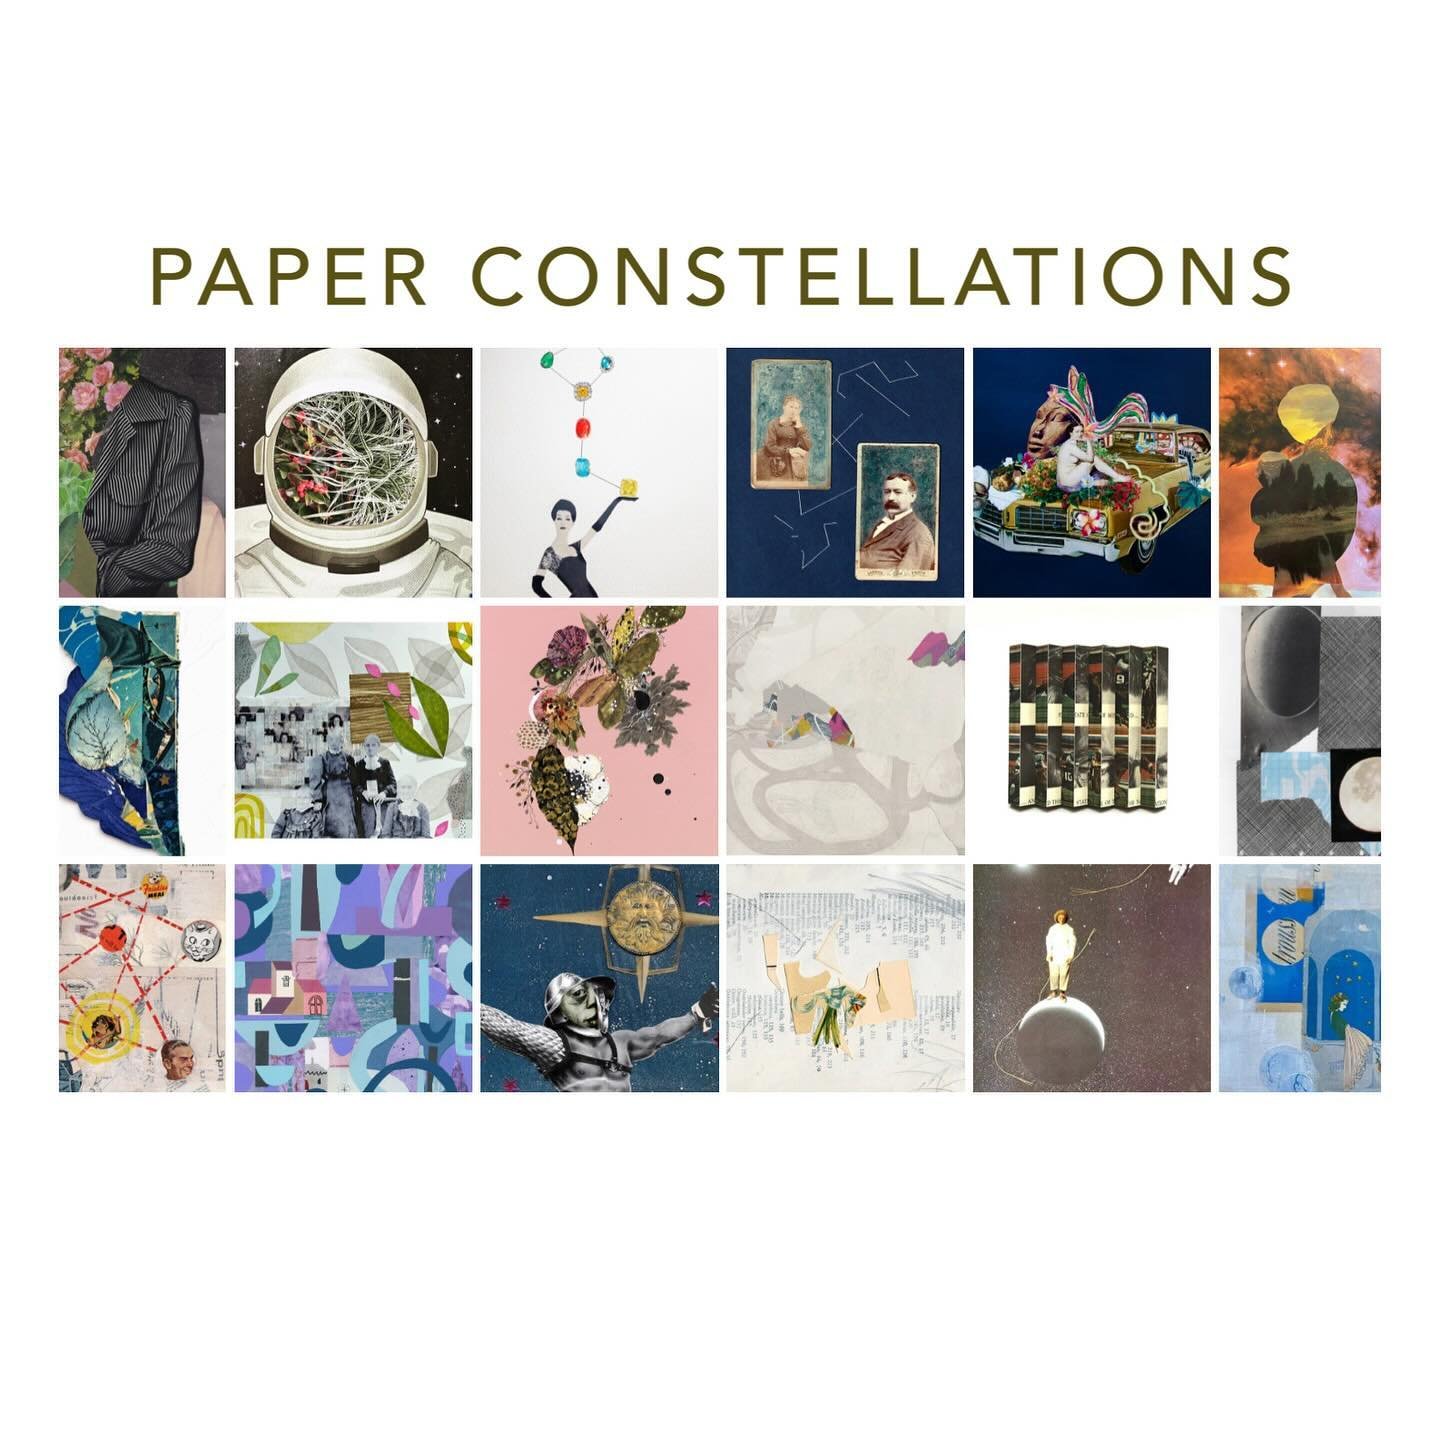 I&rsquo;m proud to have my collage &ldquo;Fond Memory&rdquo; appear as one of the 18 collages in the @wildercollage online exhibit, &ldquo;Paper Constellations.&rdquo; The exhibit is in honor of World Collage Day coming up this weekend and will run f